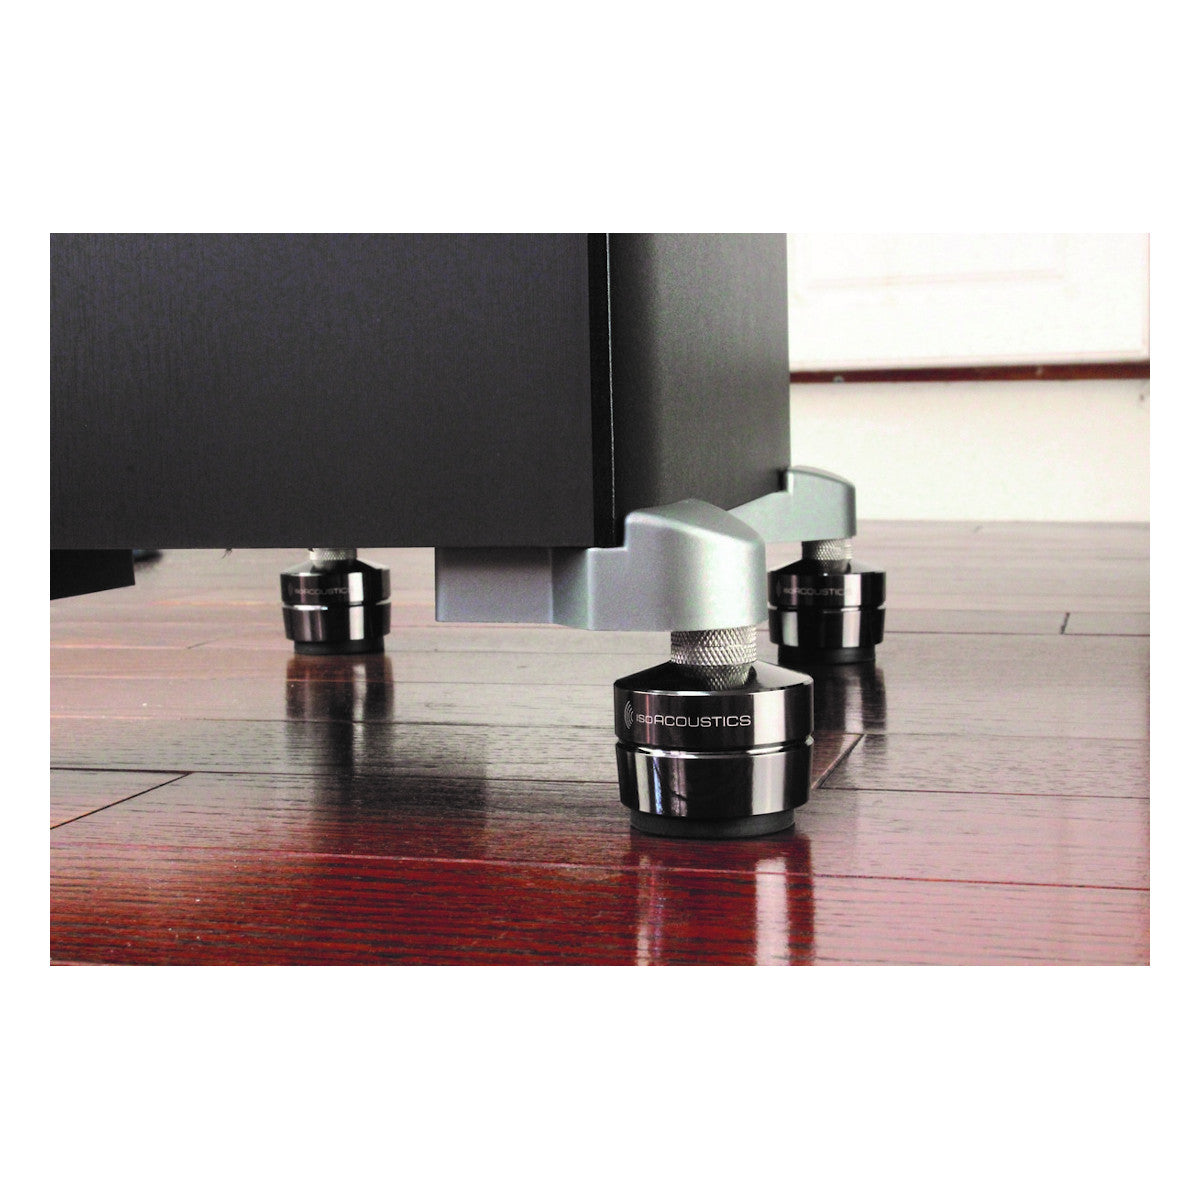 IsoAcoustics GAIA III Isolation Feet for Floorstanding Speakers and Subwoofers (4-pack)